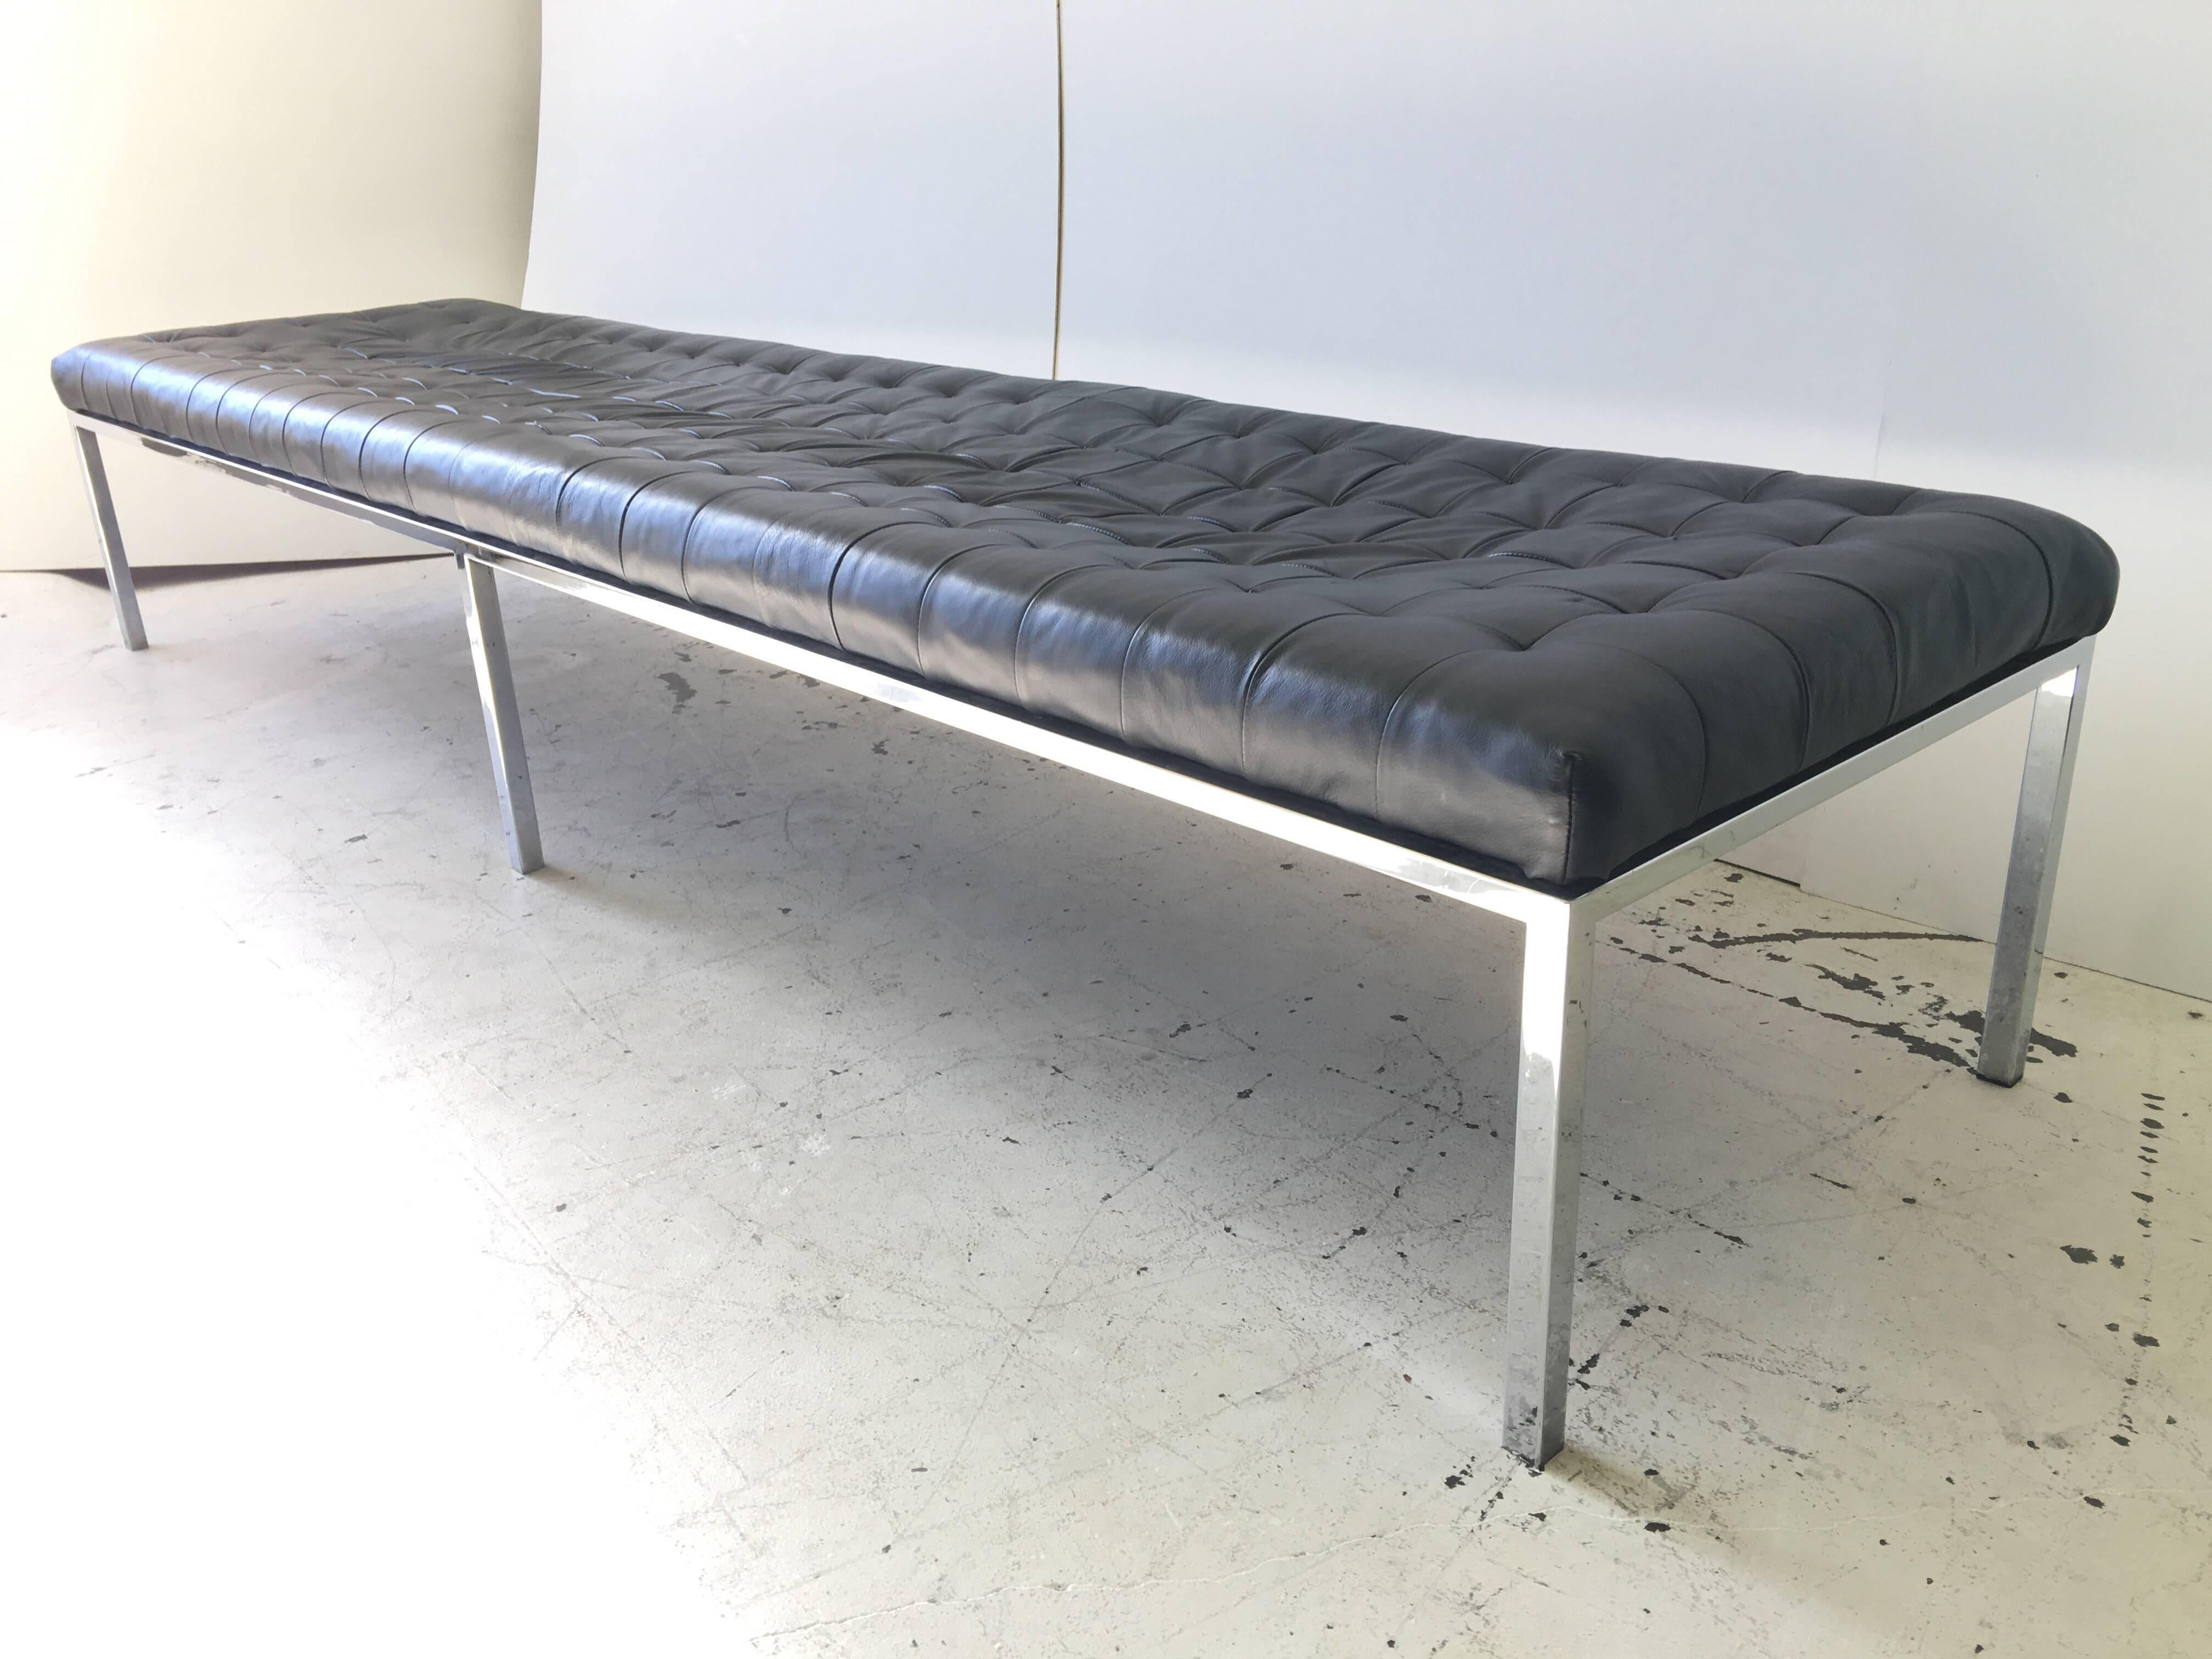 8 feet long! This is a fantastic large, leather tufted 